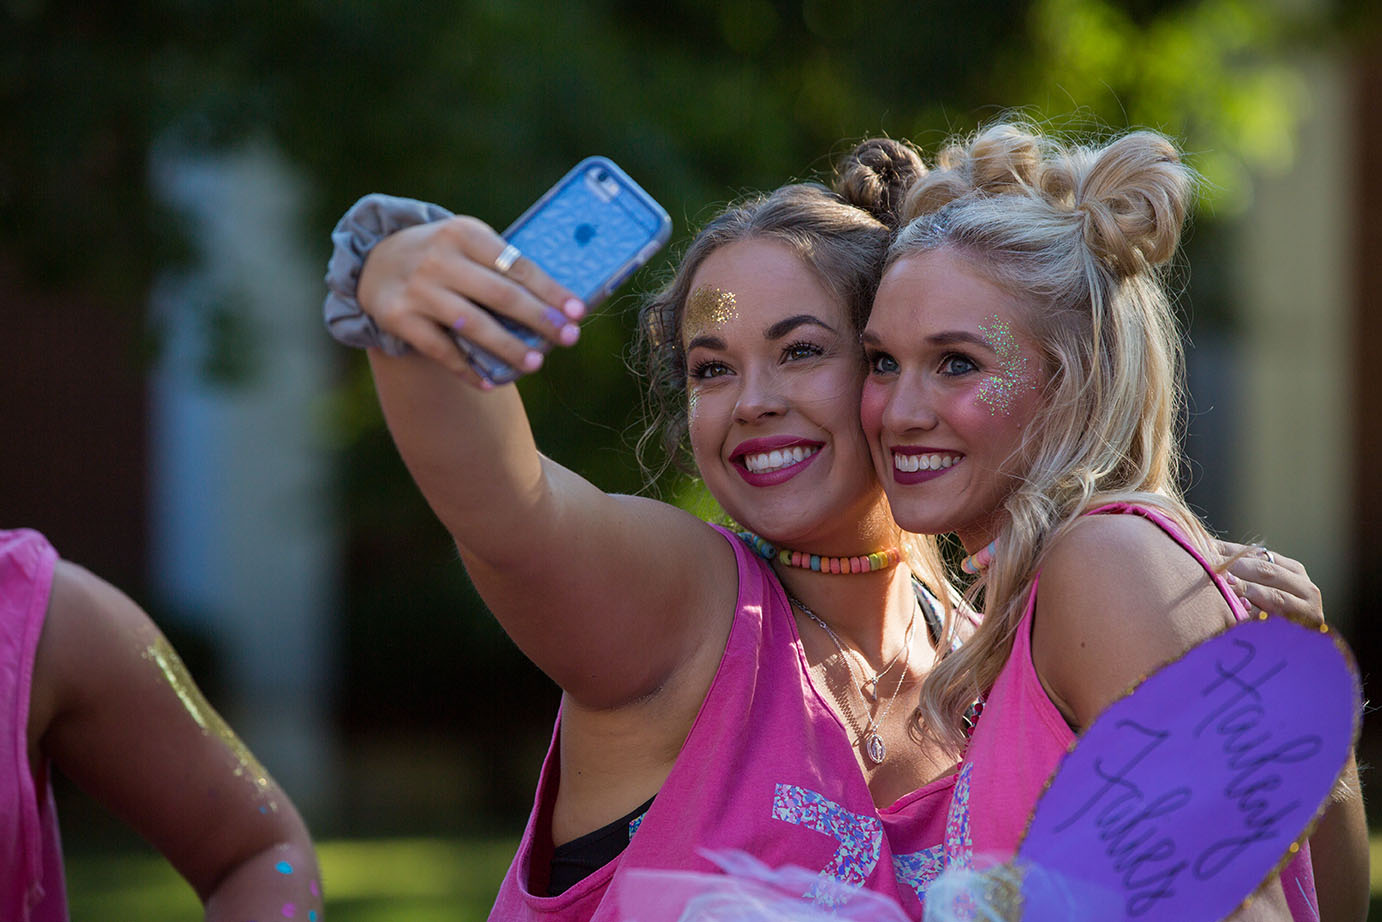 two new sorority members pose for the camera